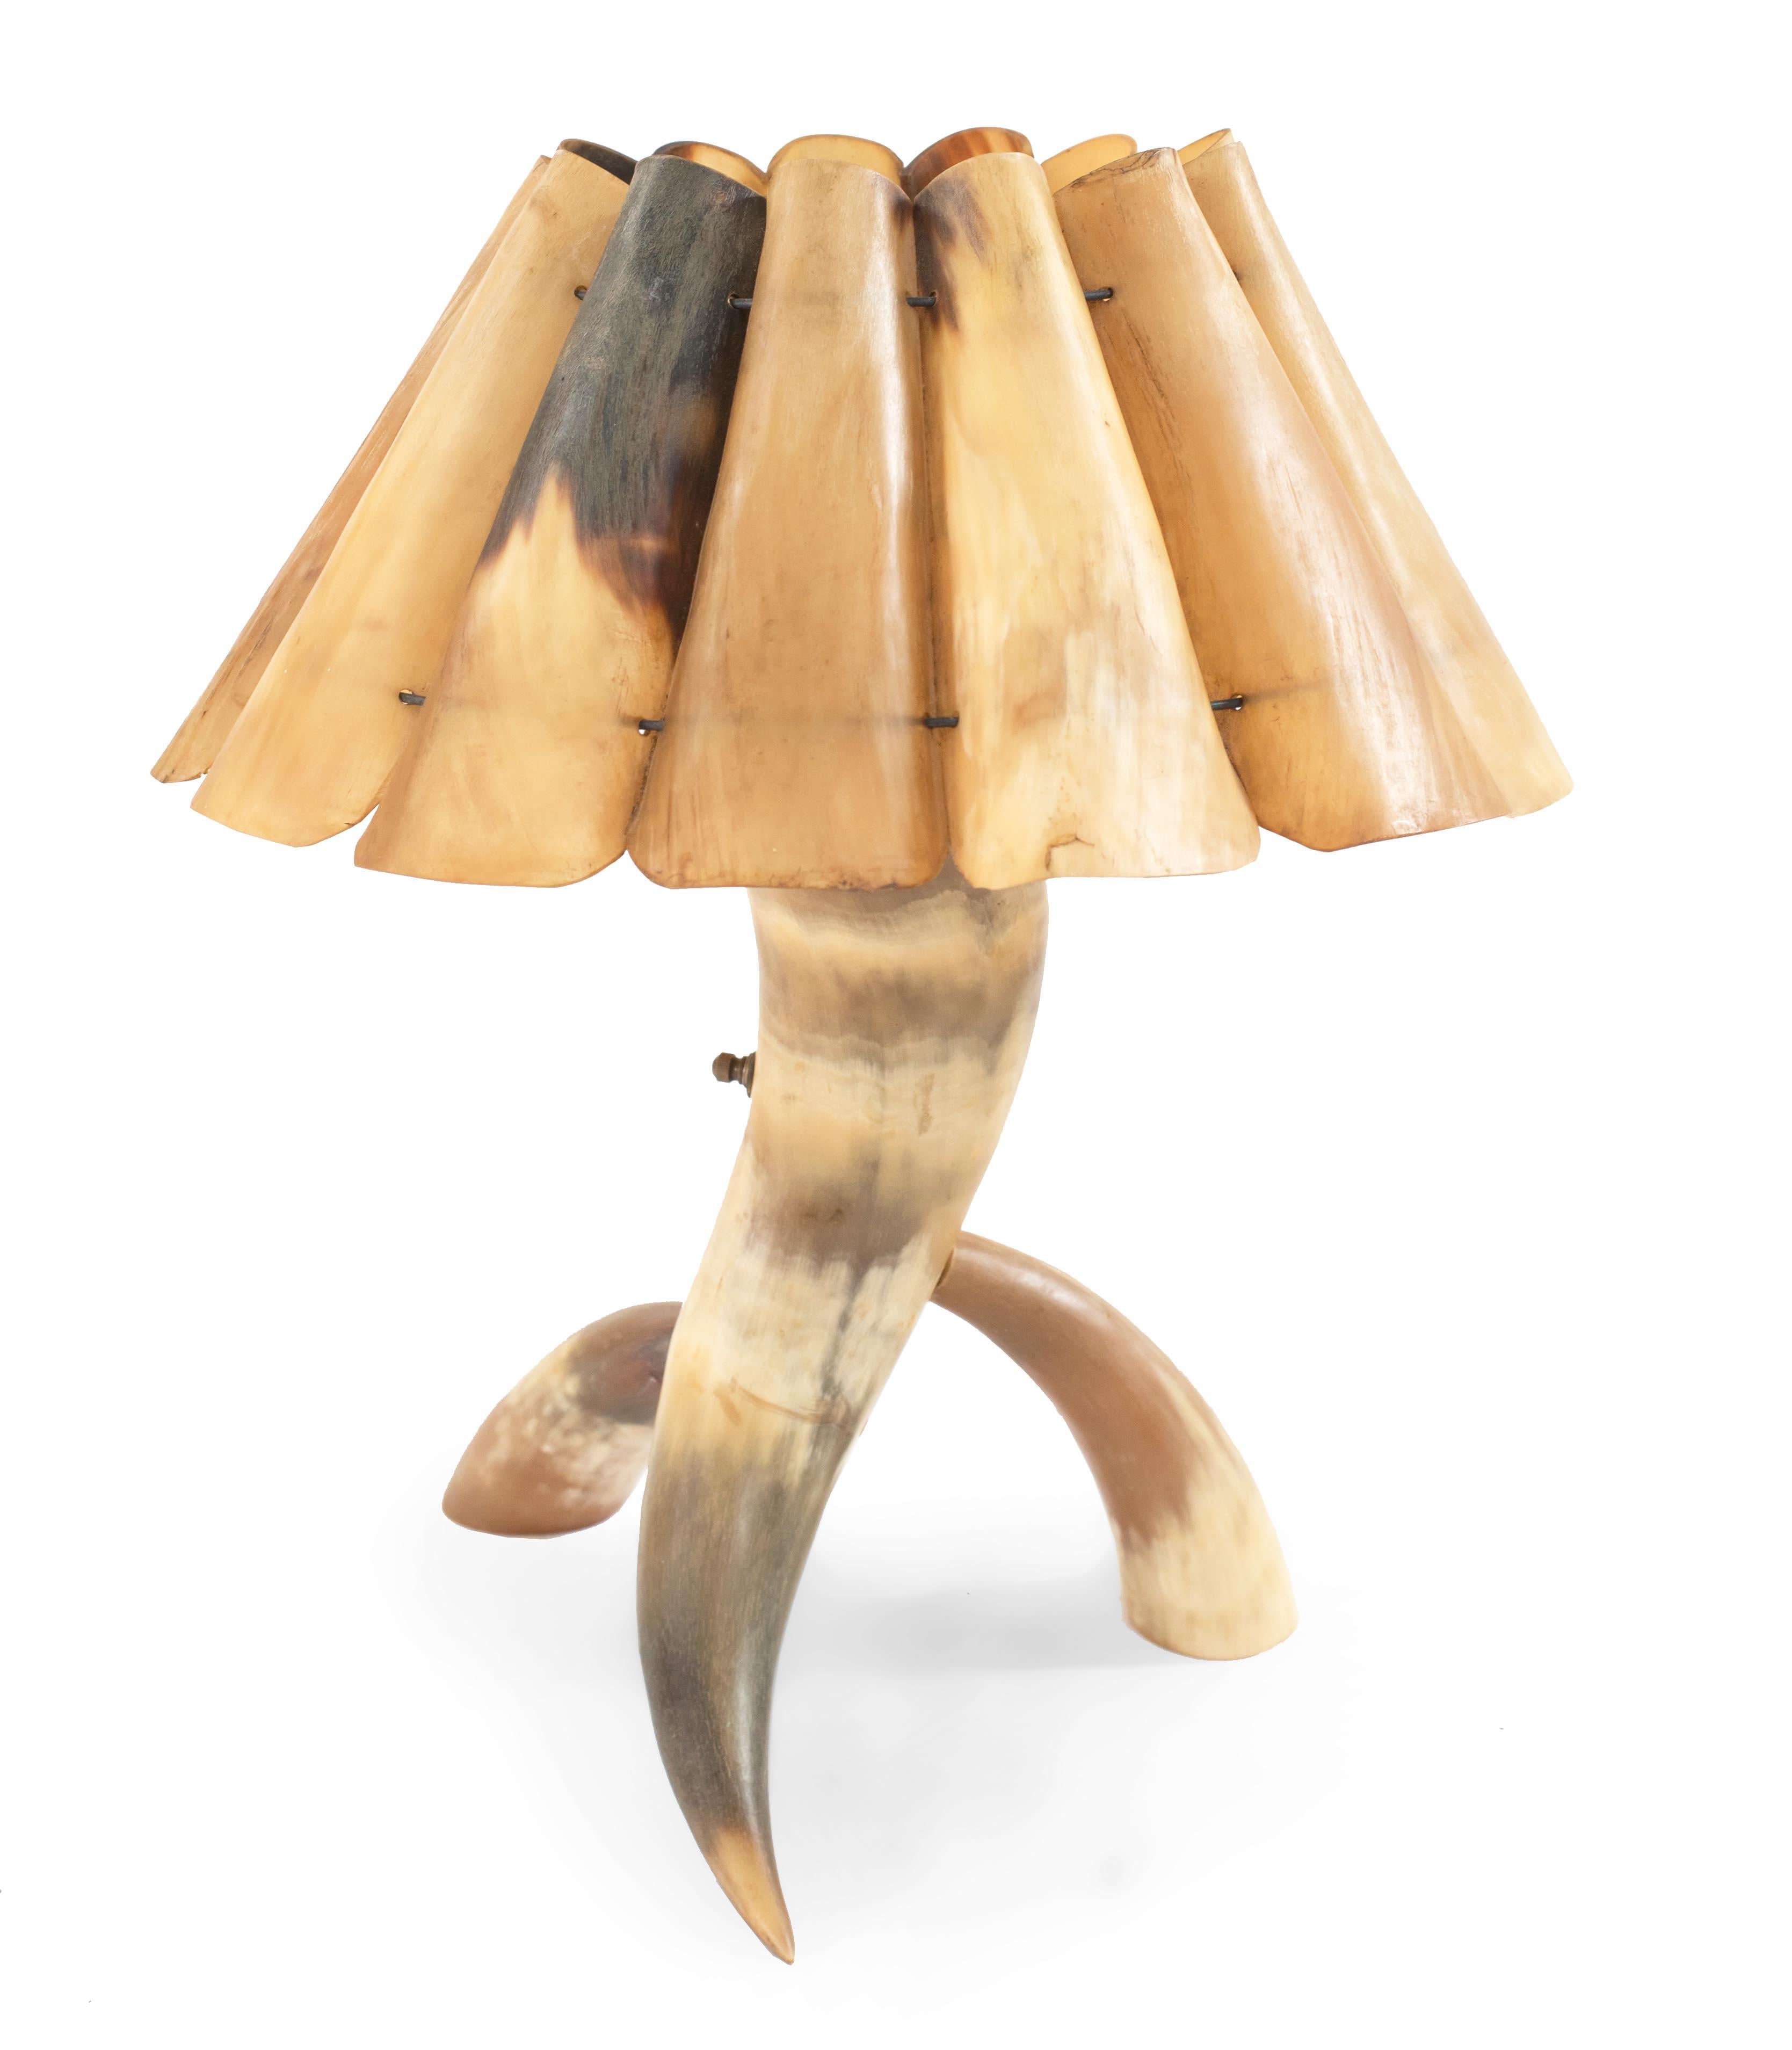 Rustic small steer horn table lamp with a base made of three horns and a shade made of halved and trimmed horns.